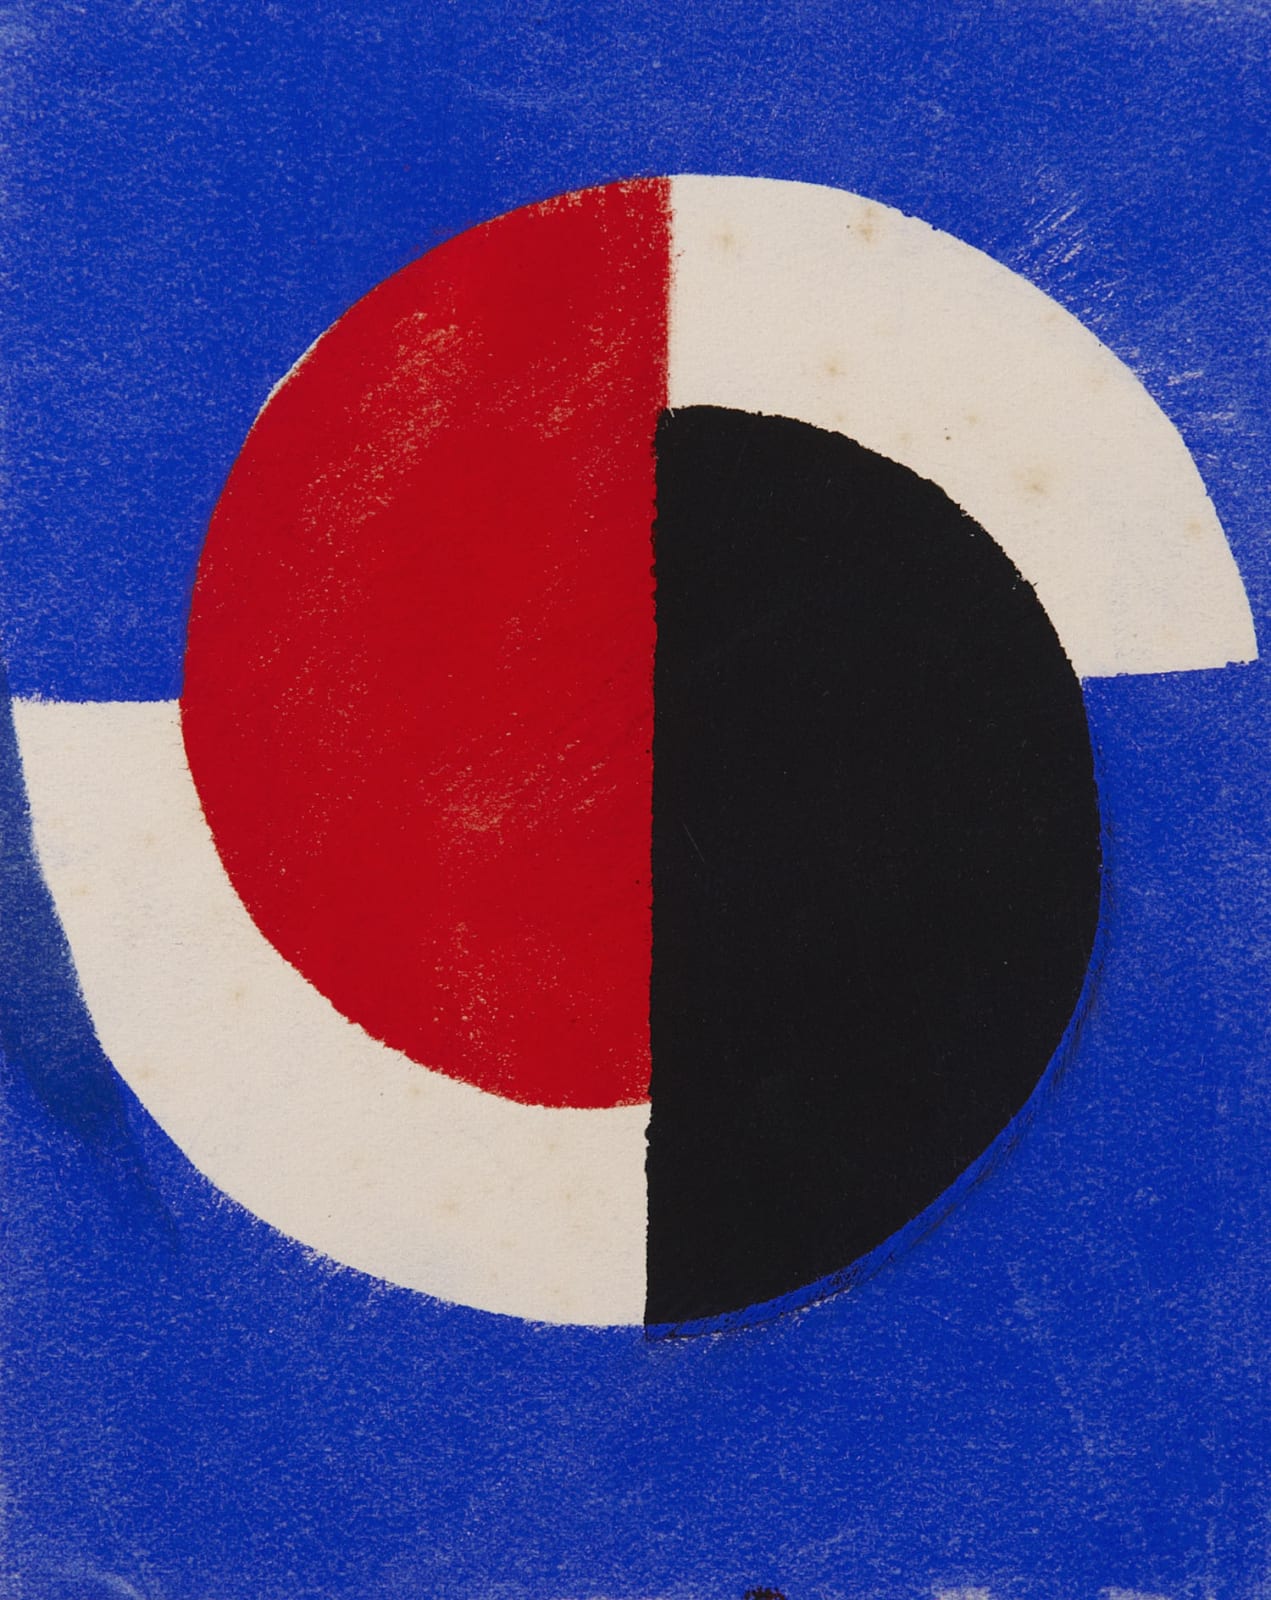 Sonia Delaunay (1885-1979) Greeting Card for Galerie Bing, Paris 1964 Poster paint on paper 14.7 x 12 cm Ben Uri Collection © Sonia Delaunay estate To see and discover more about this artist click here